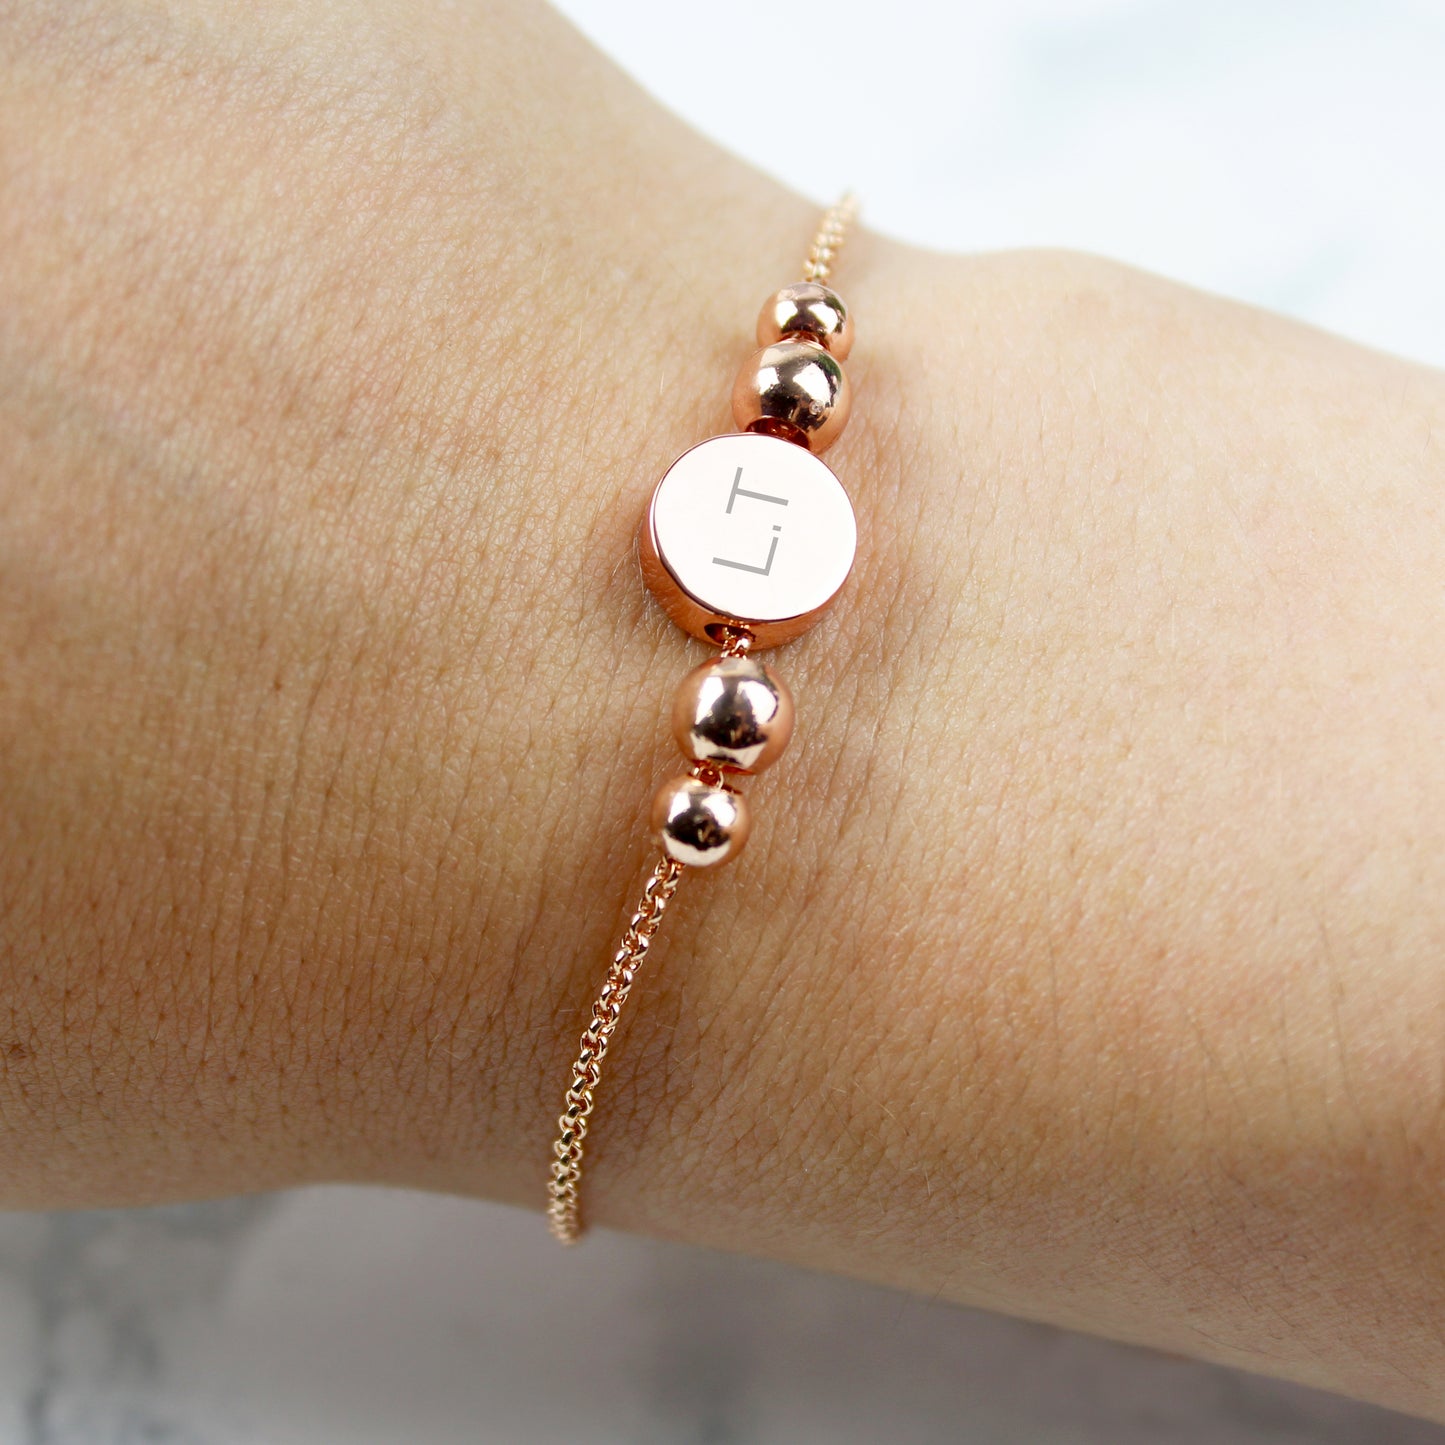 Personalised Rose Gold Tone Initials Disc Bracelet - Personalise It!